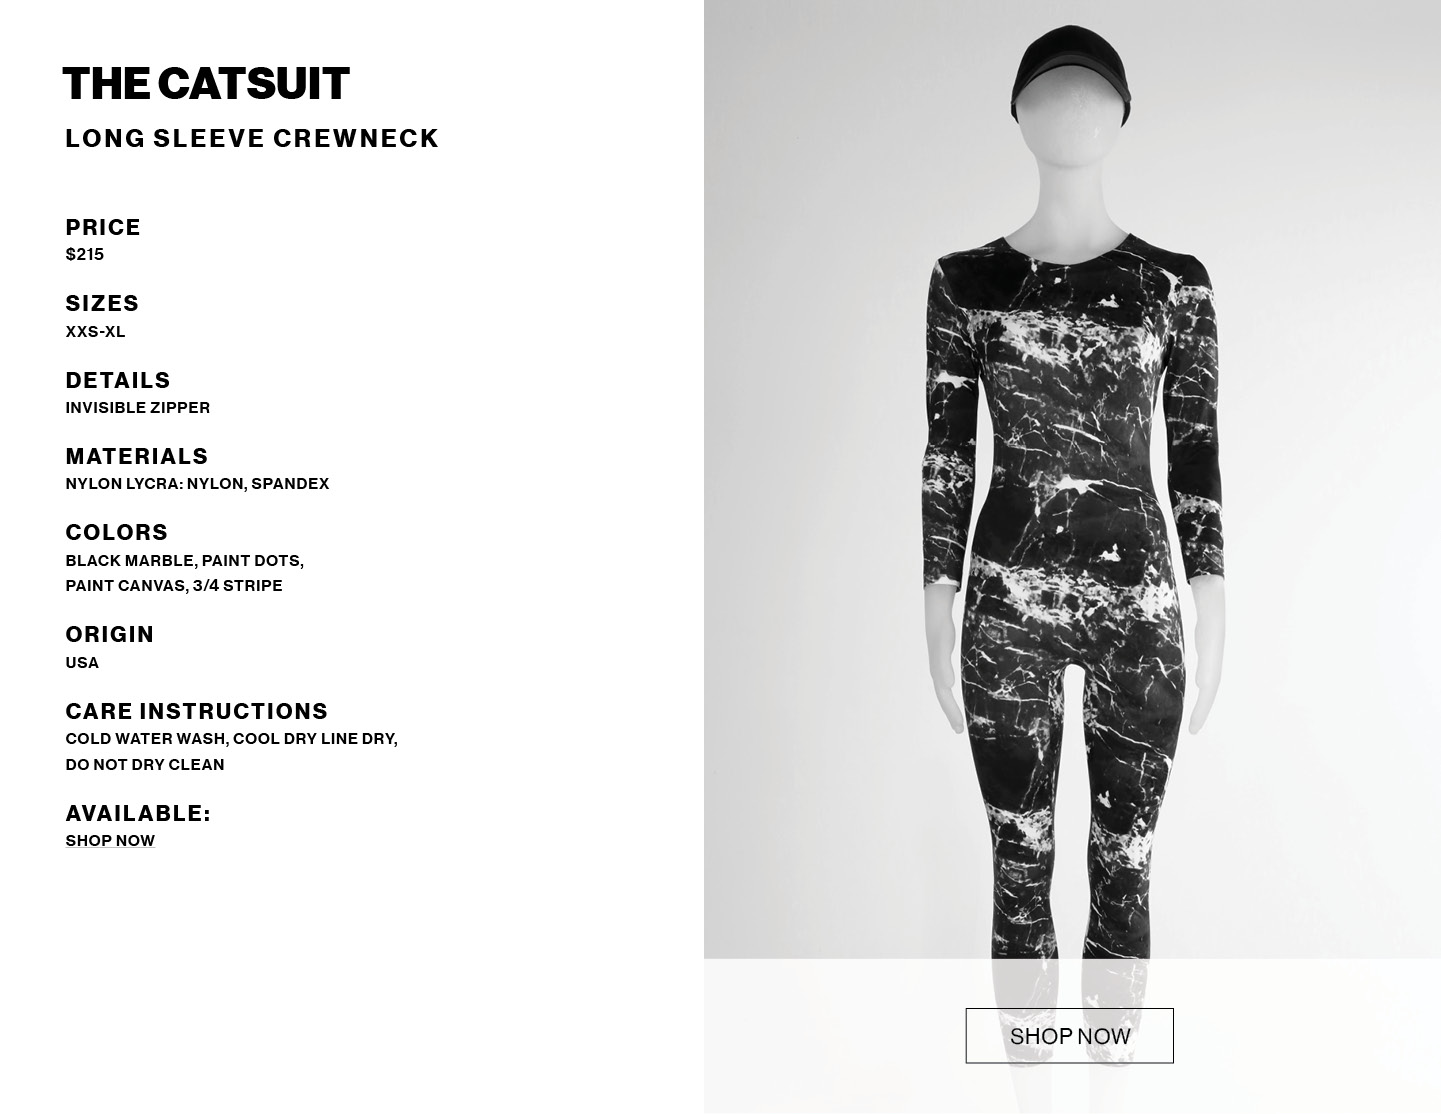 Catsuit product info